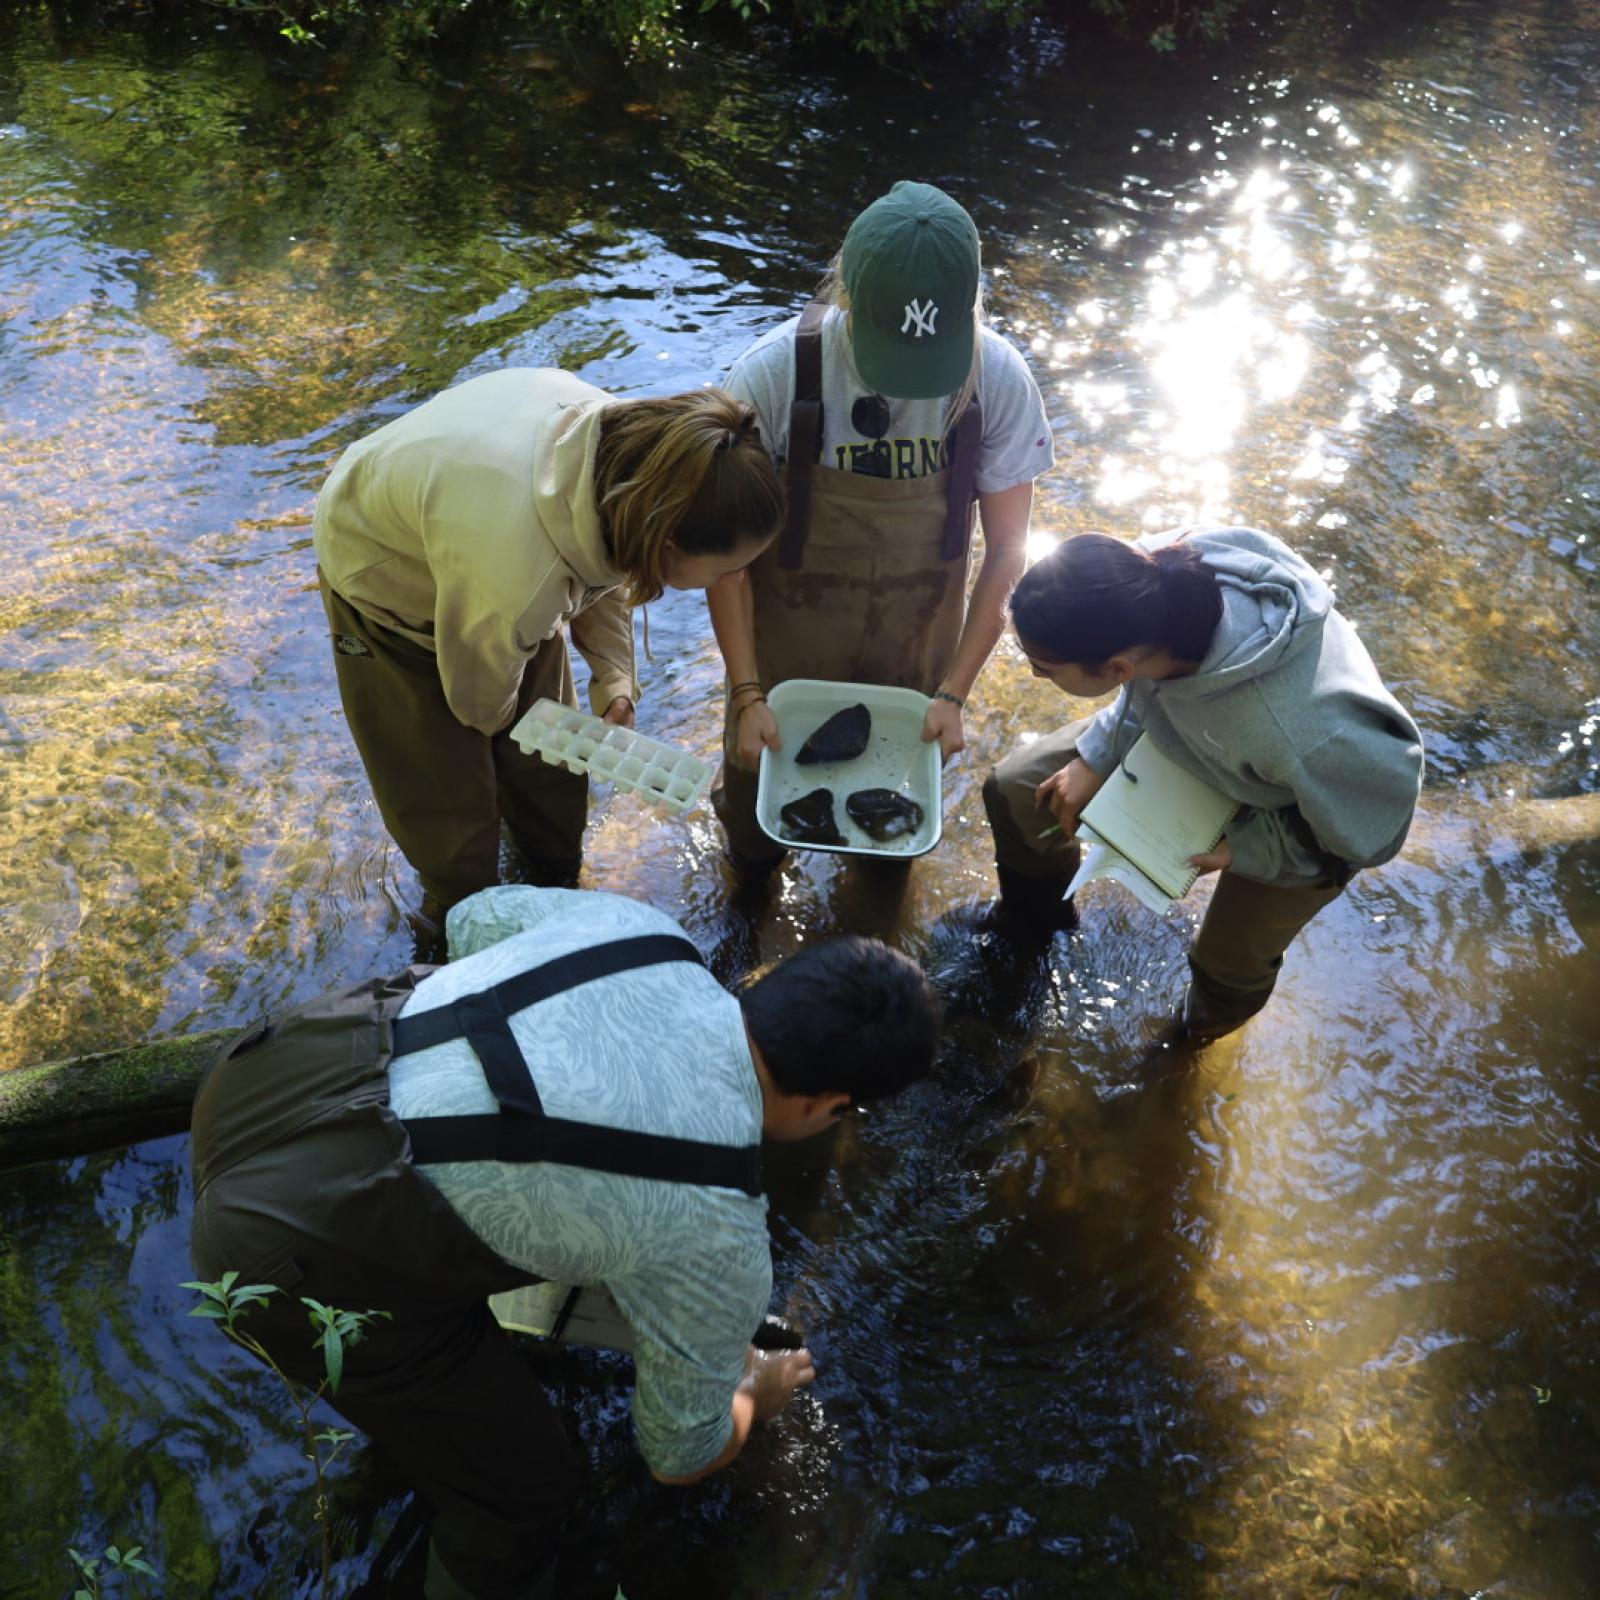 A group of people collecting specimens in the river